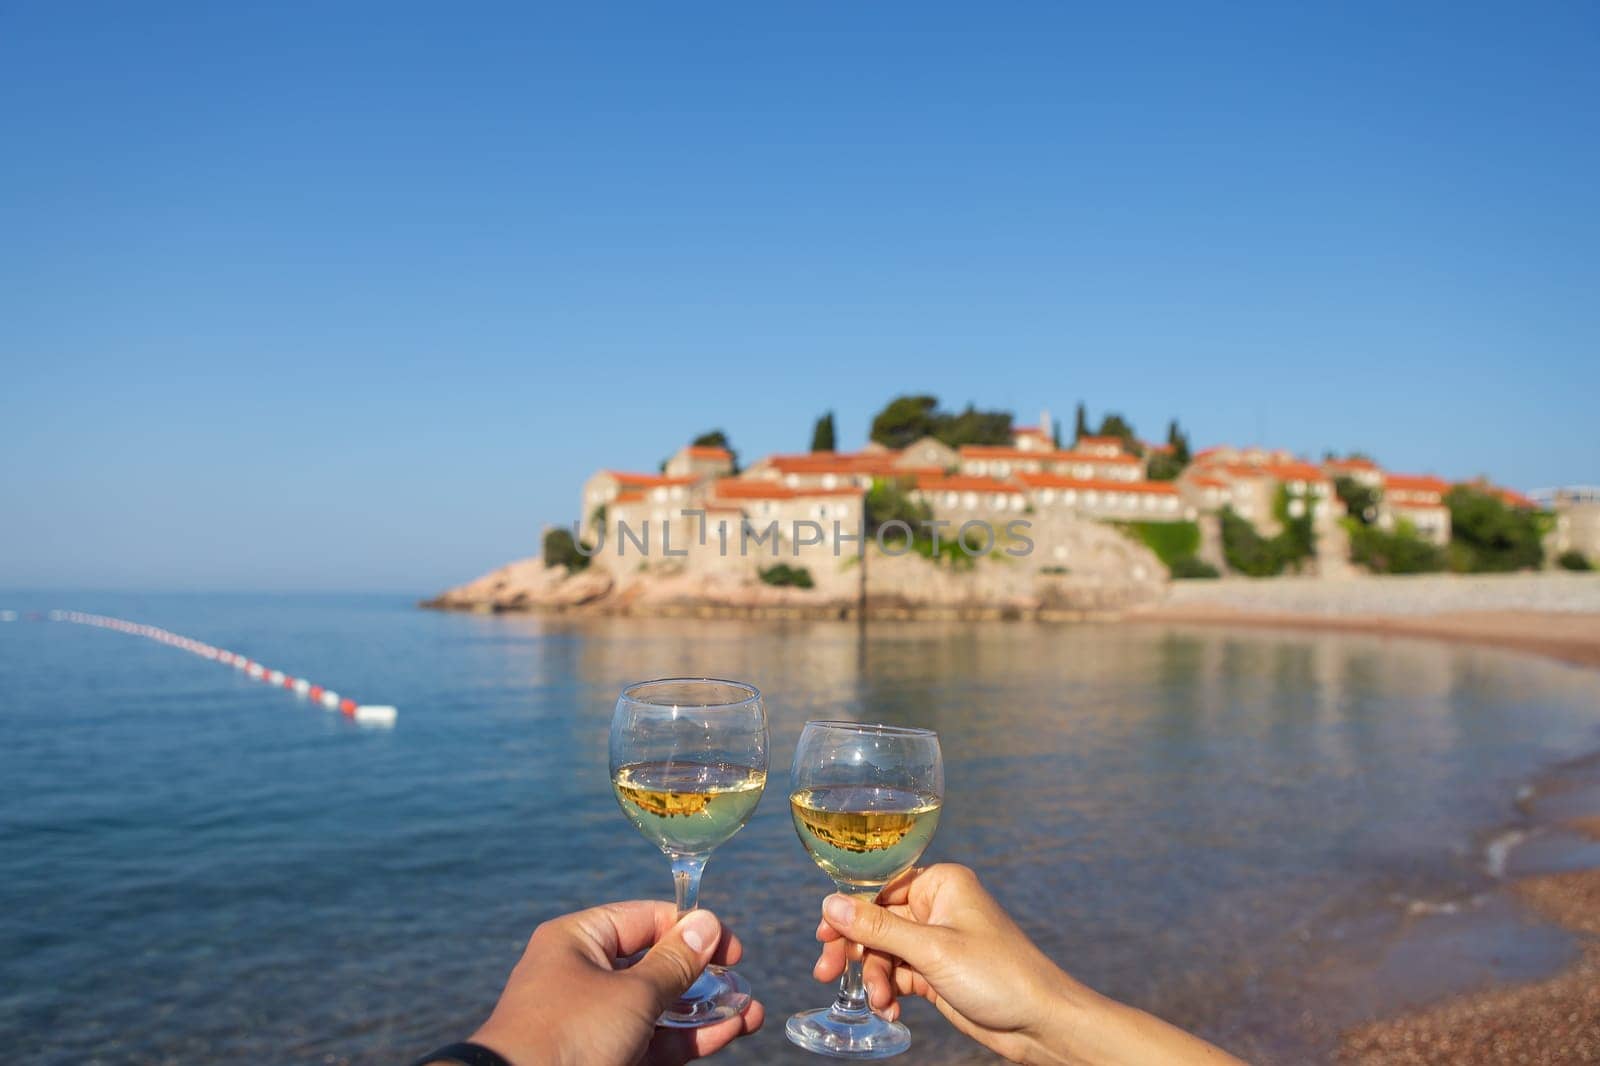 Sveti Stefan Island, Montenegro July 5, 2021: Adriatic Sea. Glasses with wine on the background of the island. Romantic trip